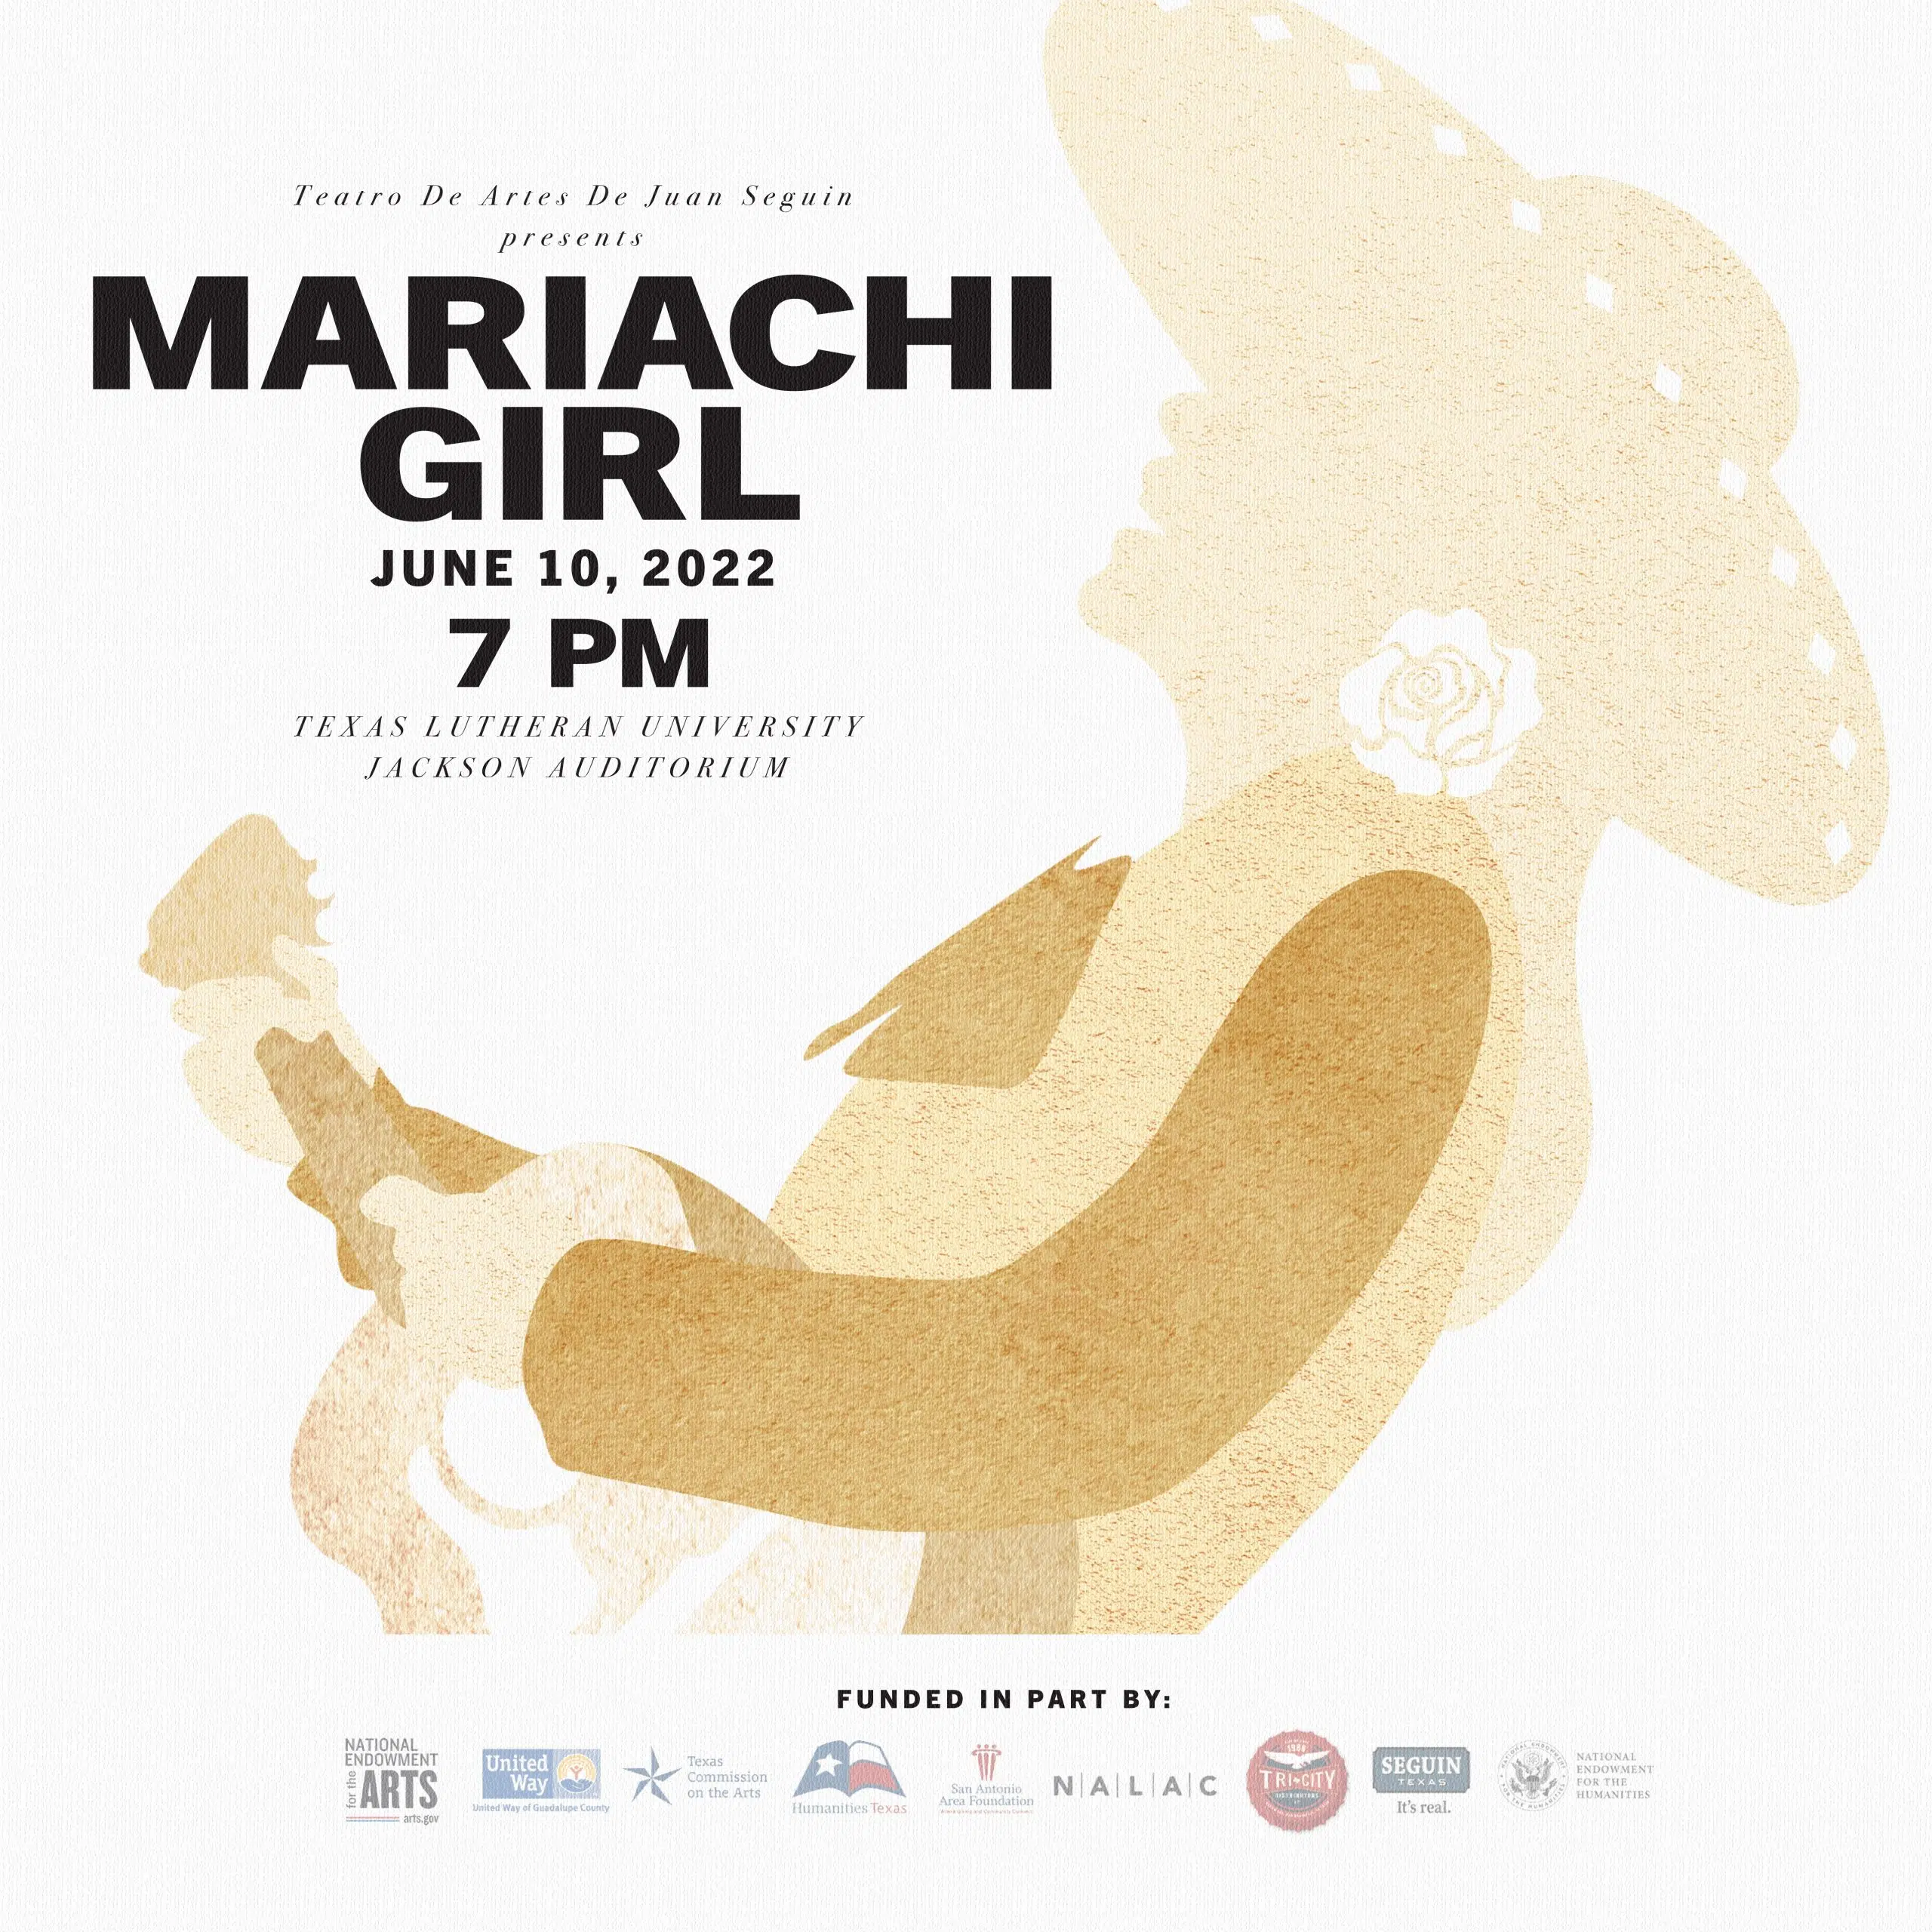 Tickets on sale for Friday night's performance of Mariachi Girl